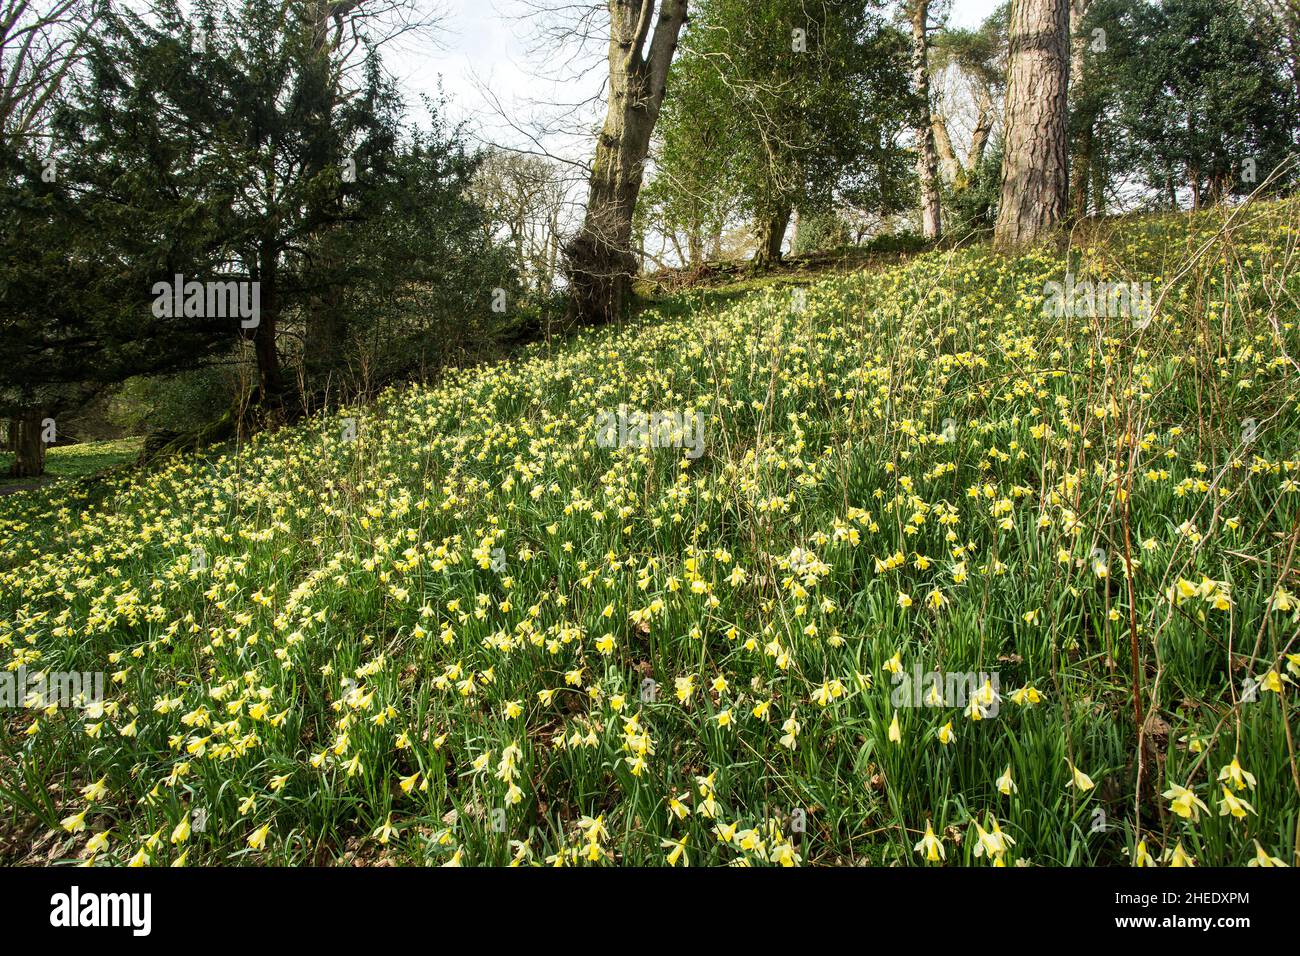 William Wordworth host of golden daffodils at Dora's Field, Grasmere, The Lake District National Park, Cumbria, England Stock Photo